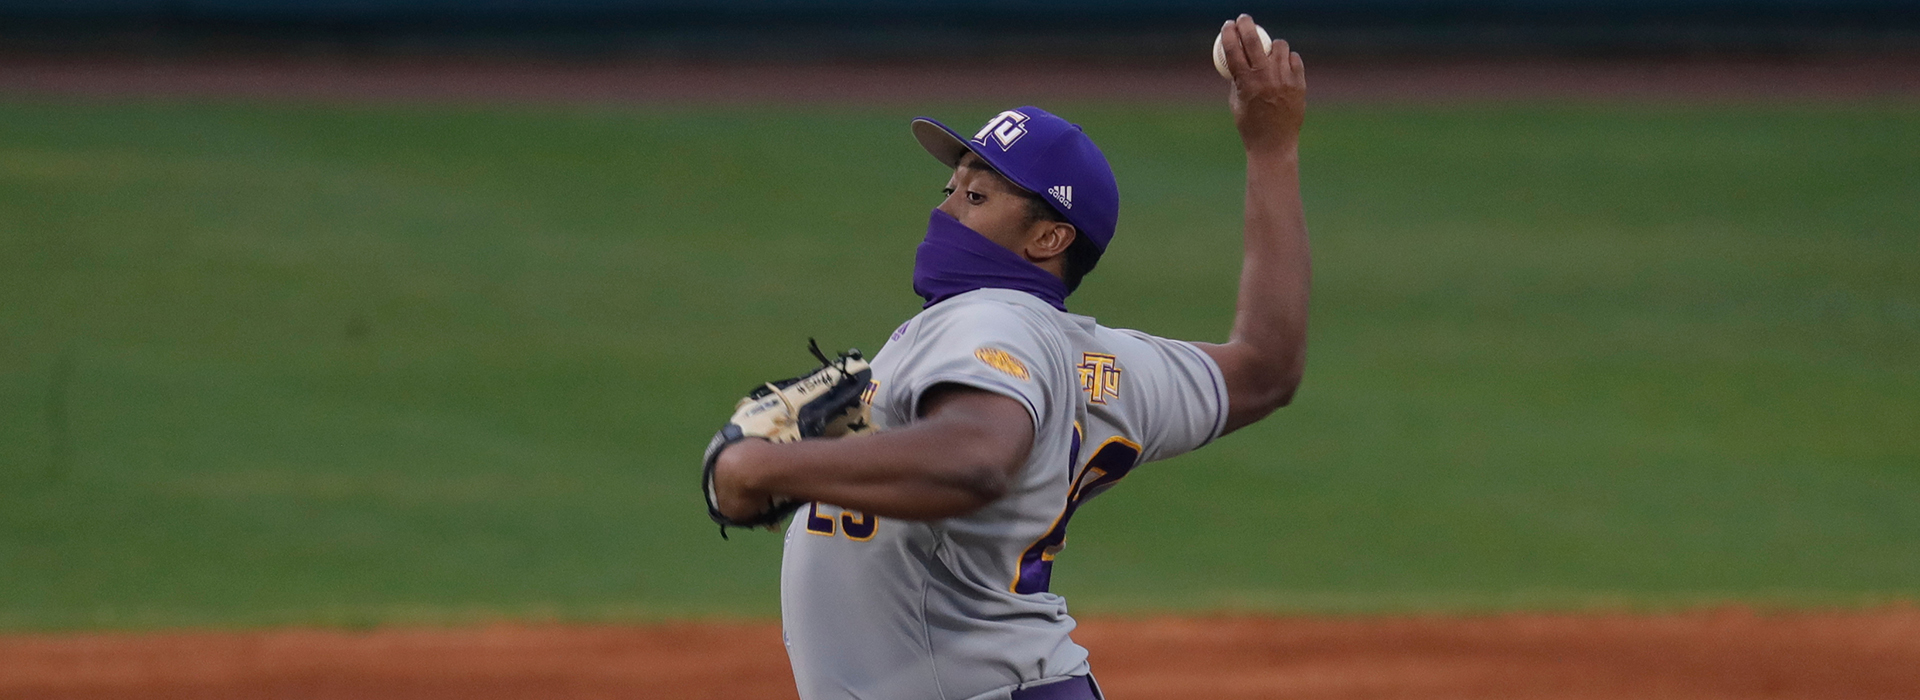 Golden Eagles fall in series finale at College of Charleston